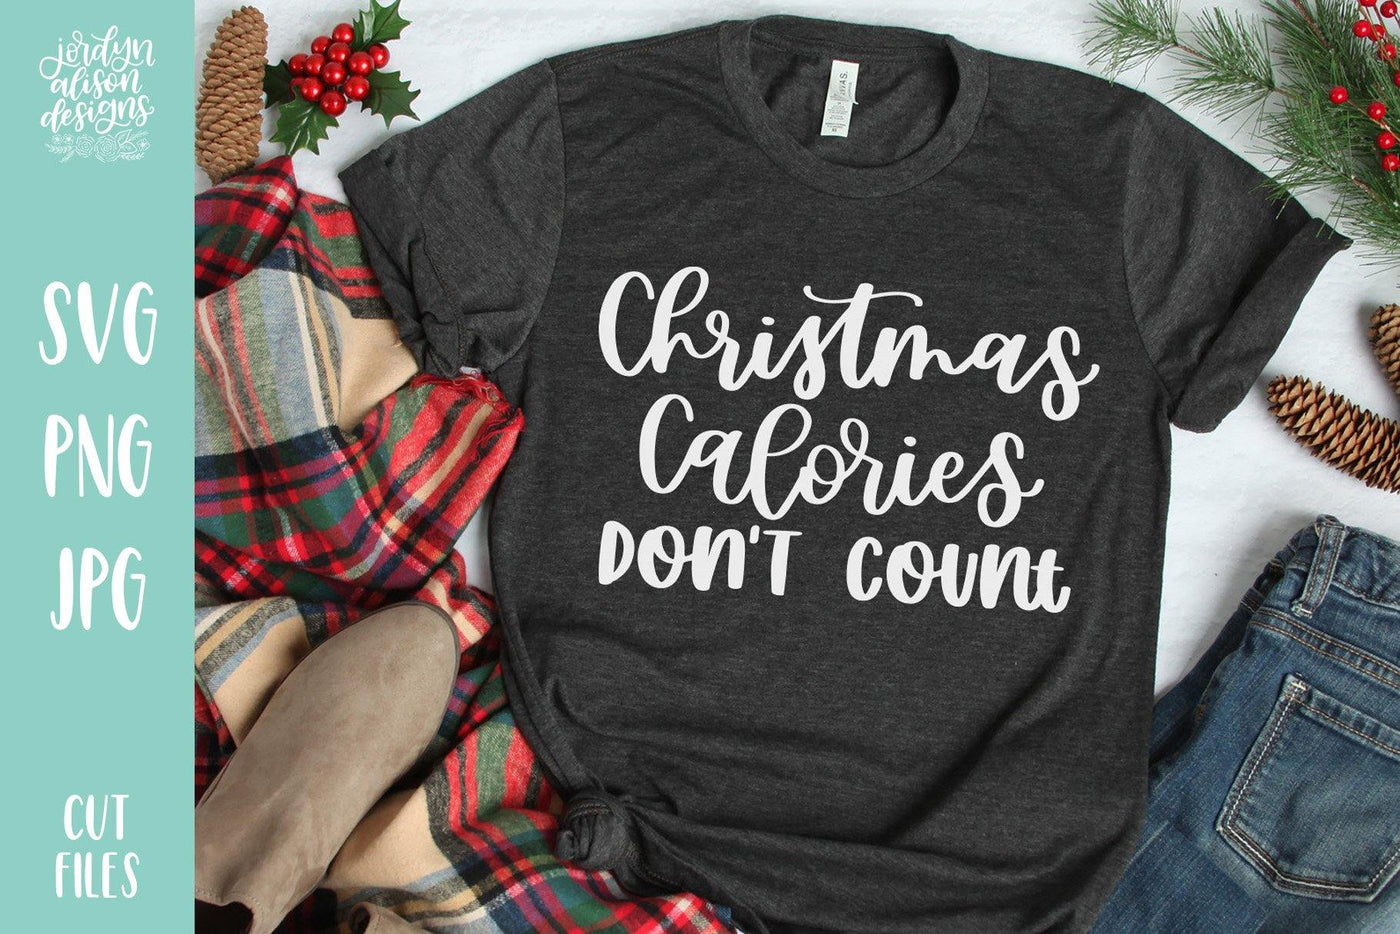 Grey T-Shirt with Handwritten text "Christmas Calories Don't Count" in white letters